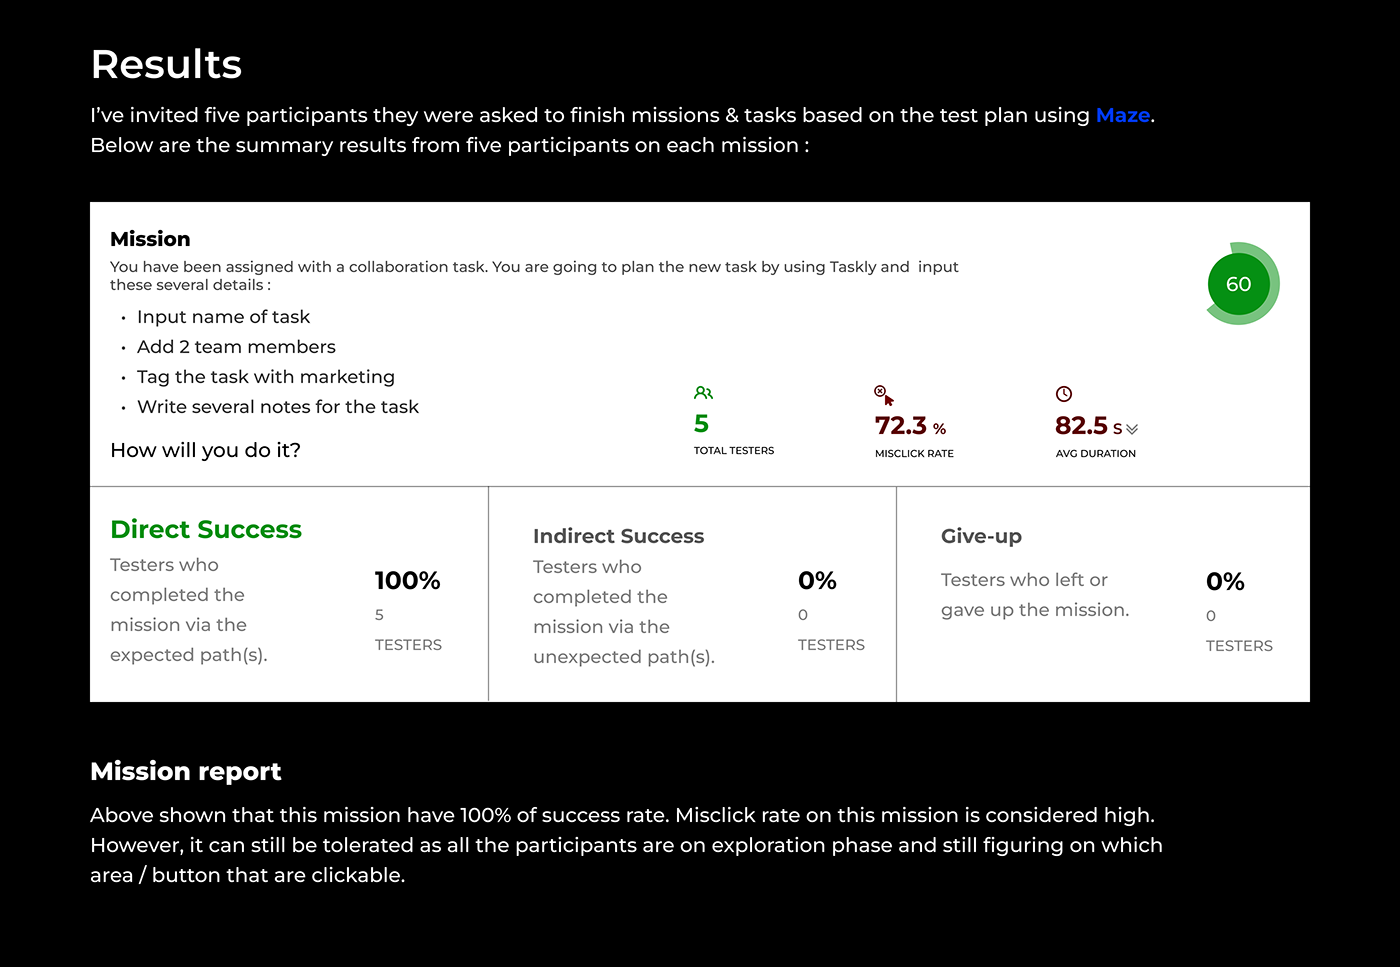 User research user interface user experience SaaS Product Figma